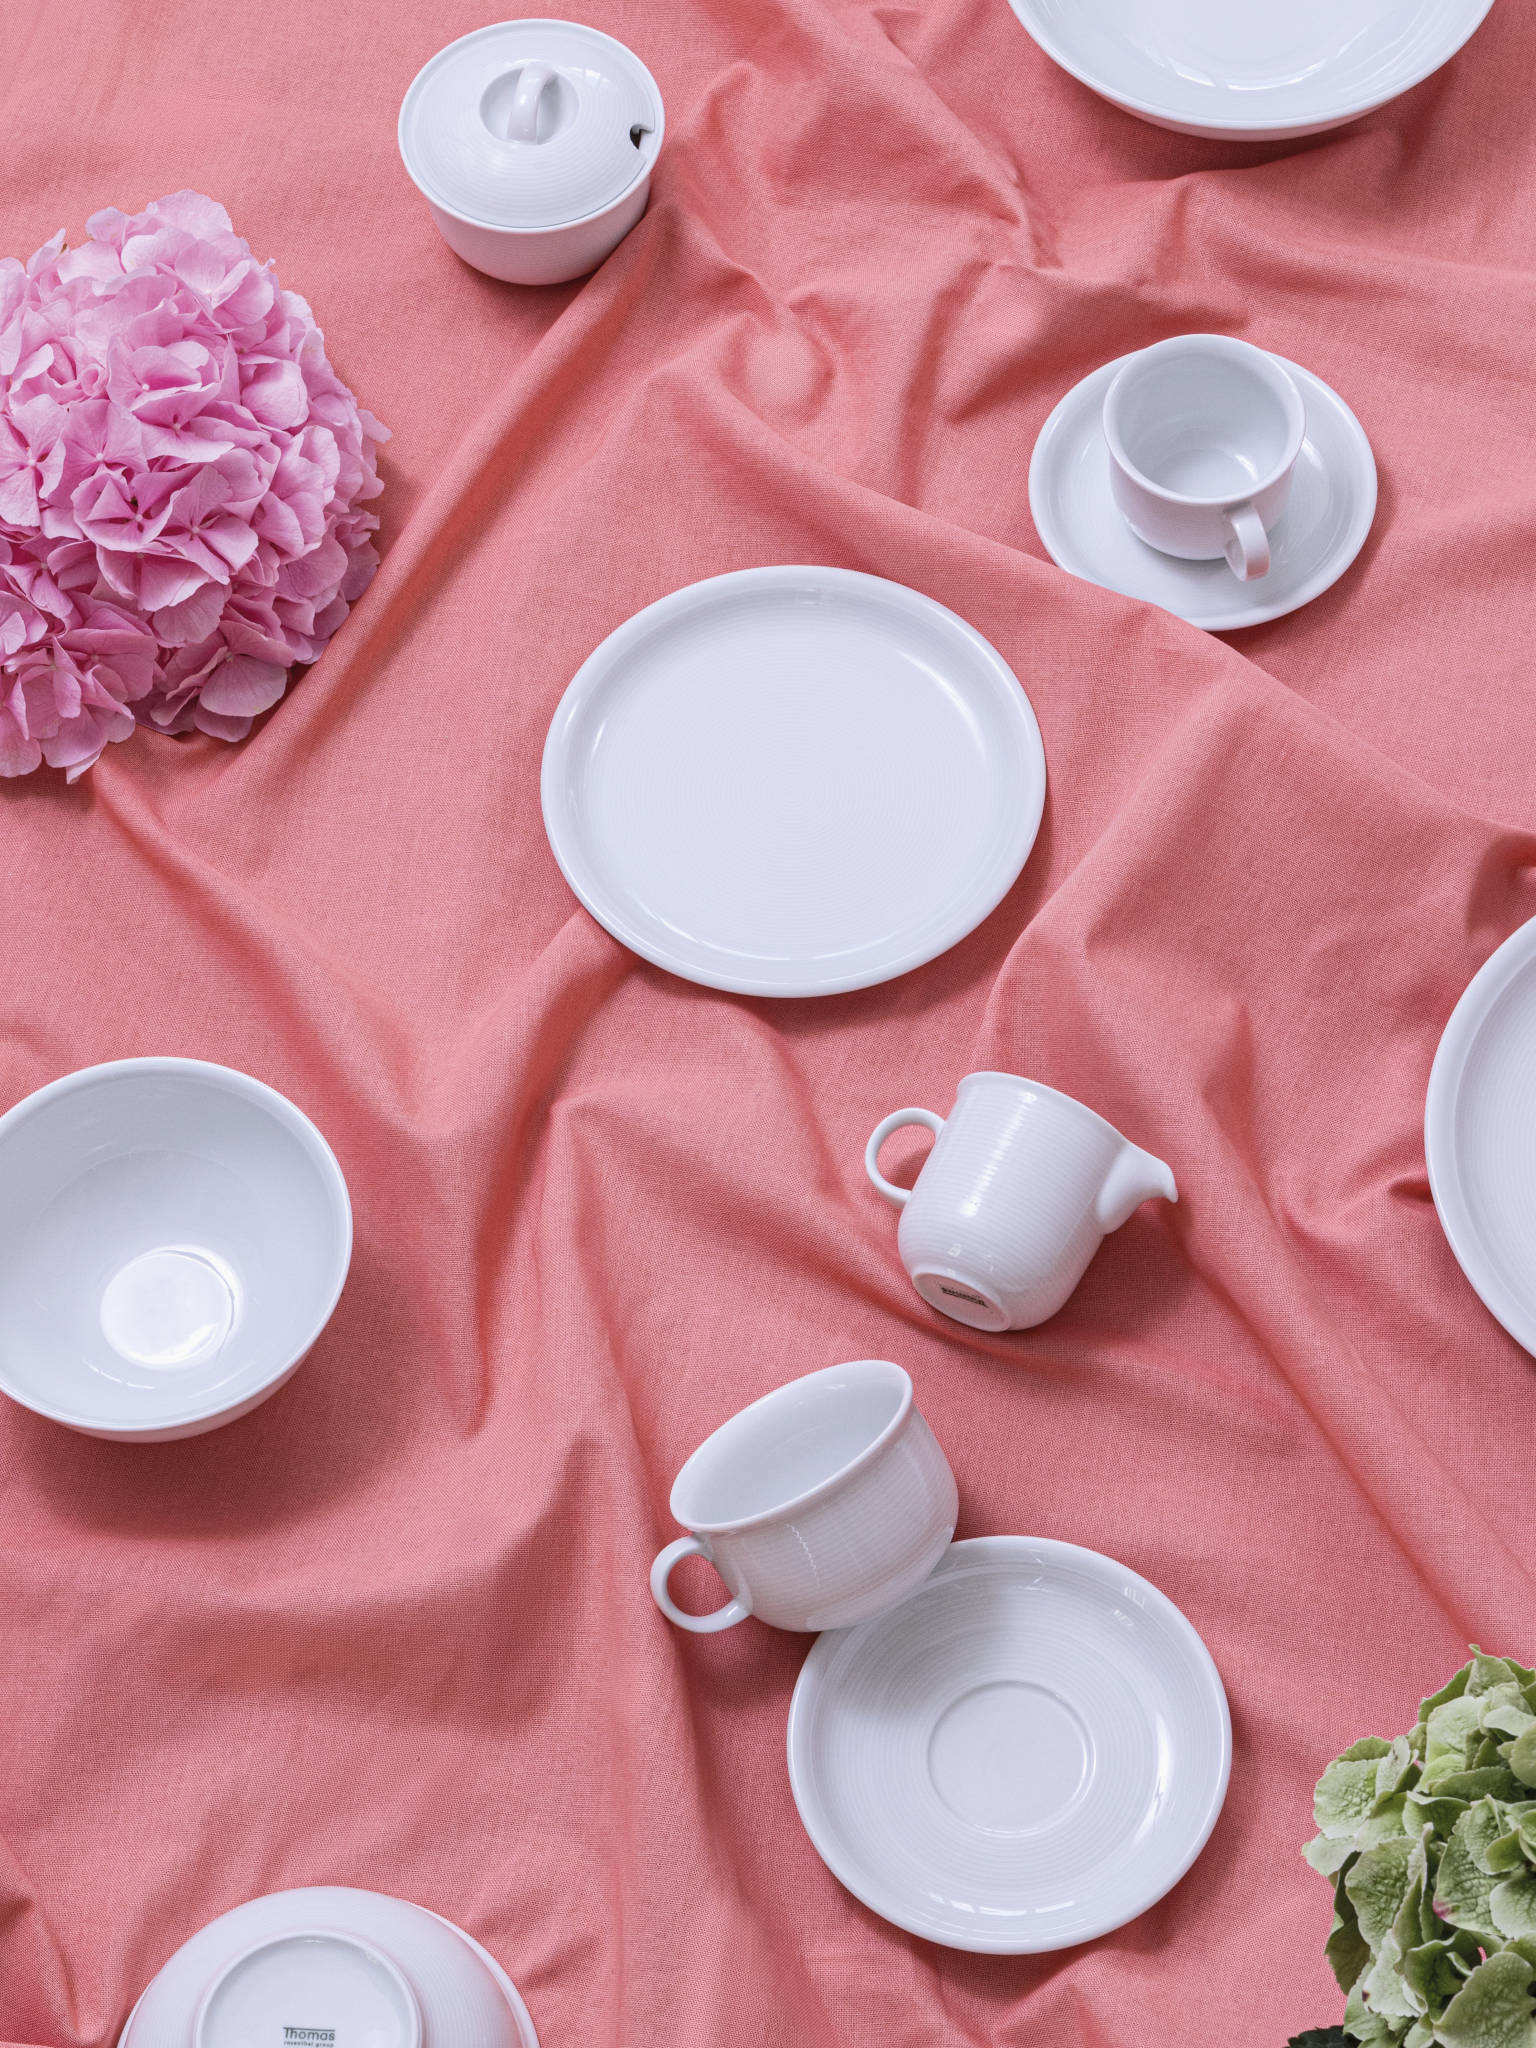 Thomas Trend White plates, cups and saucers on light pink table cloth